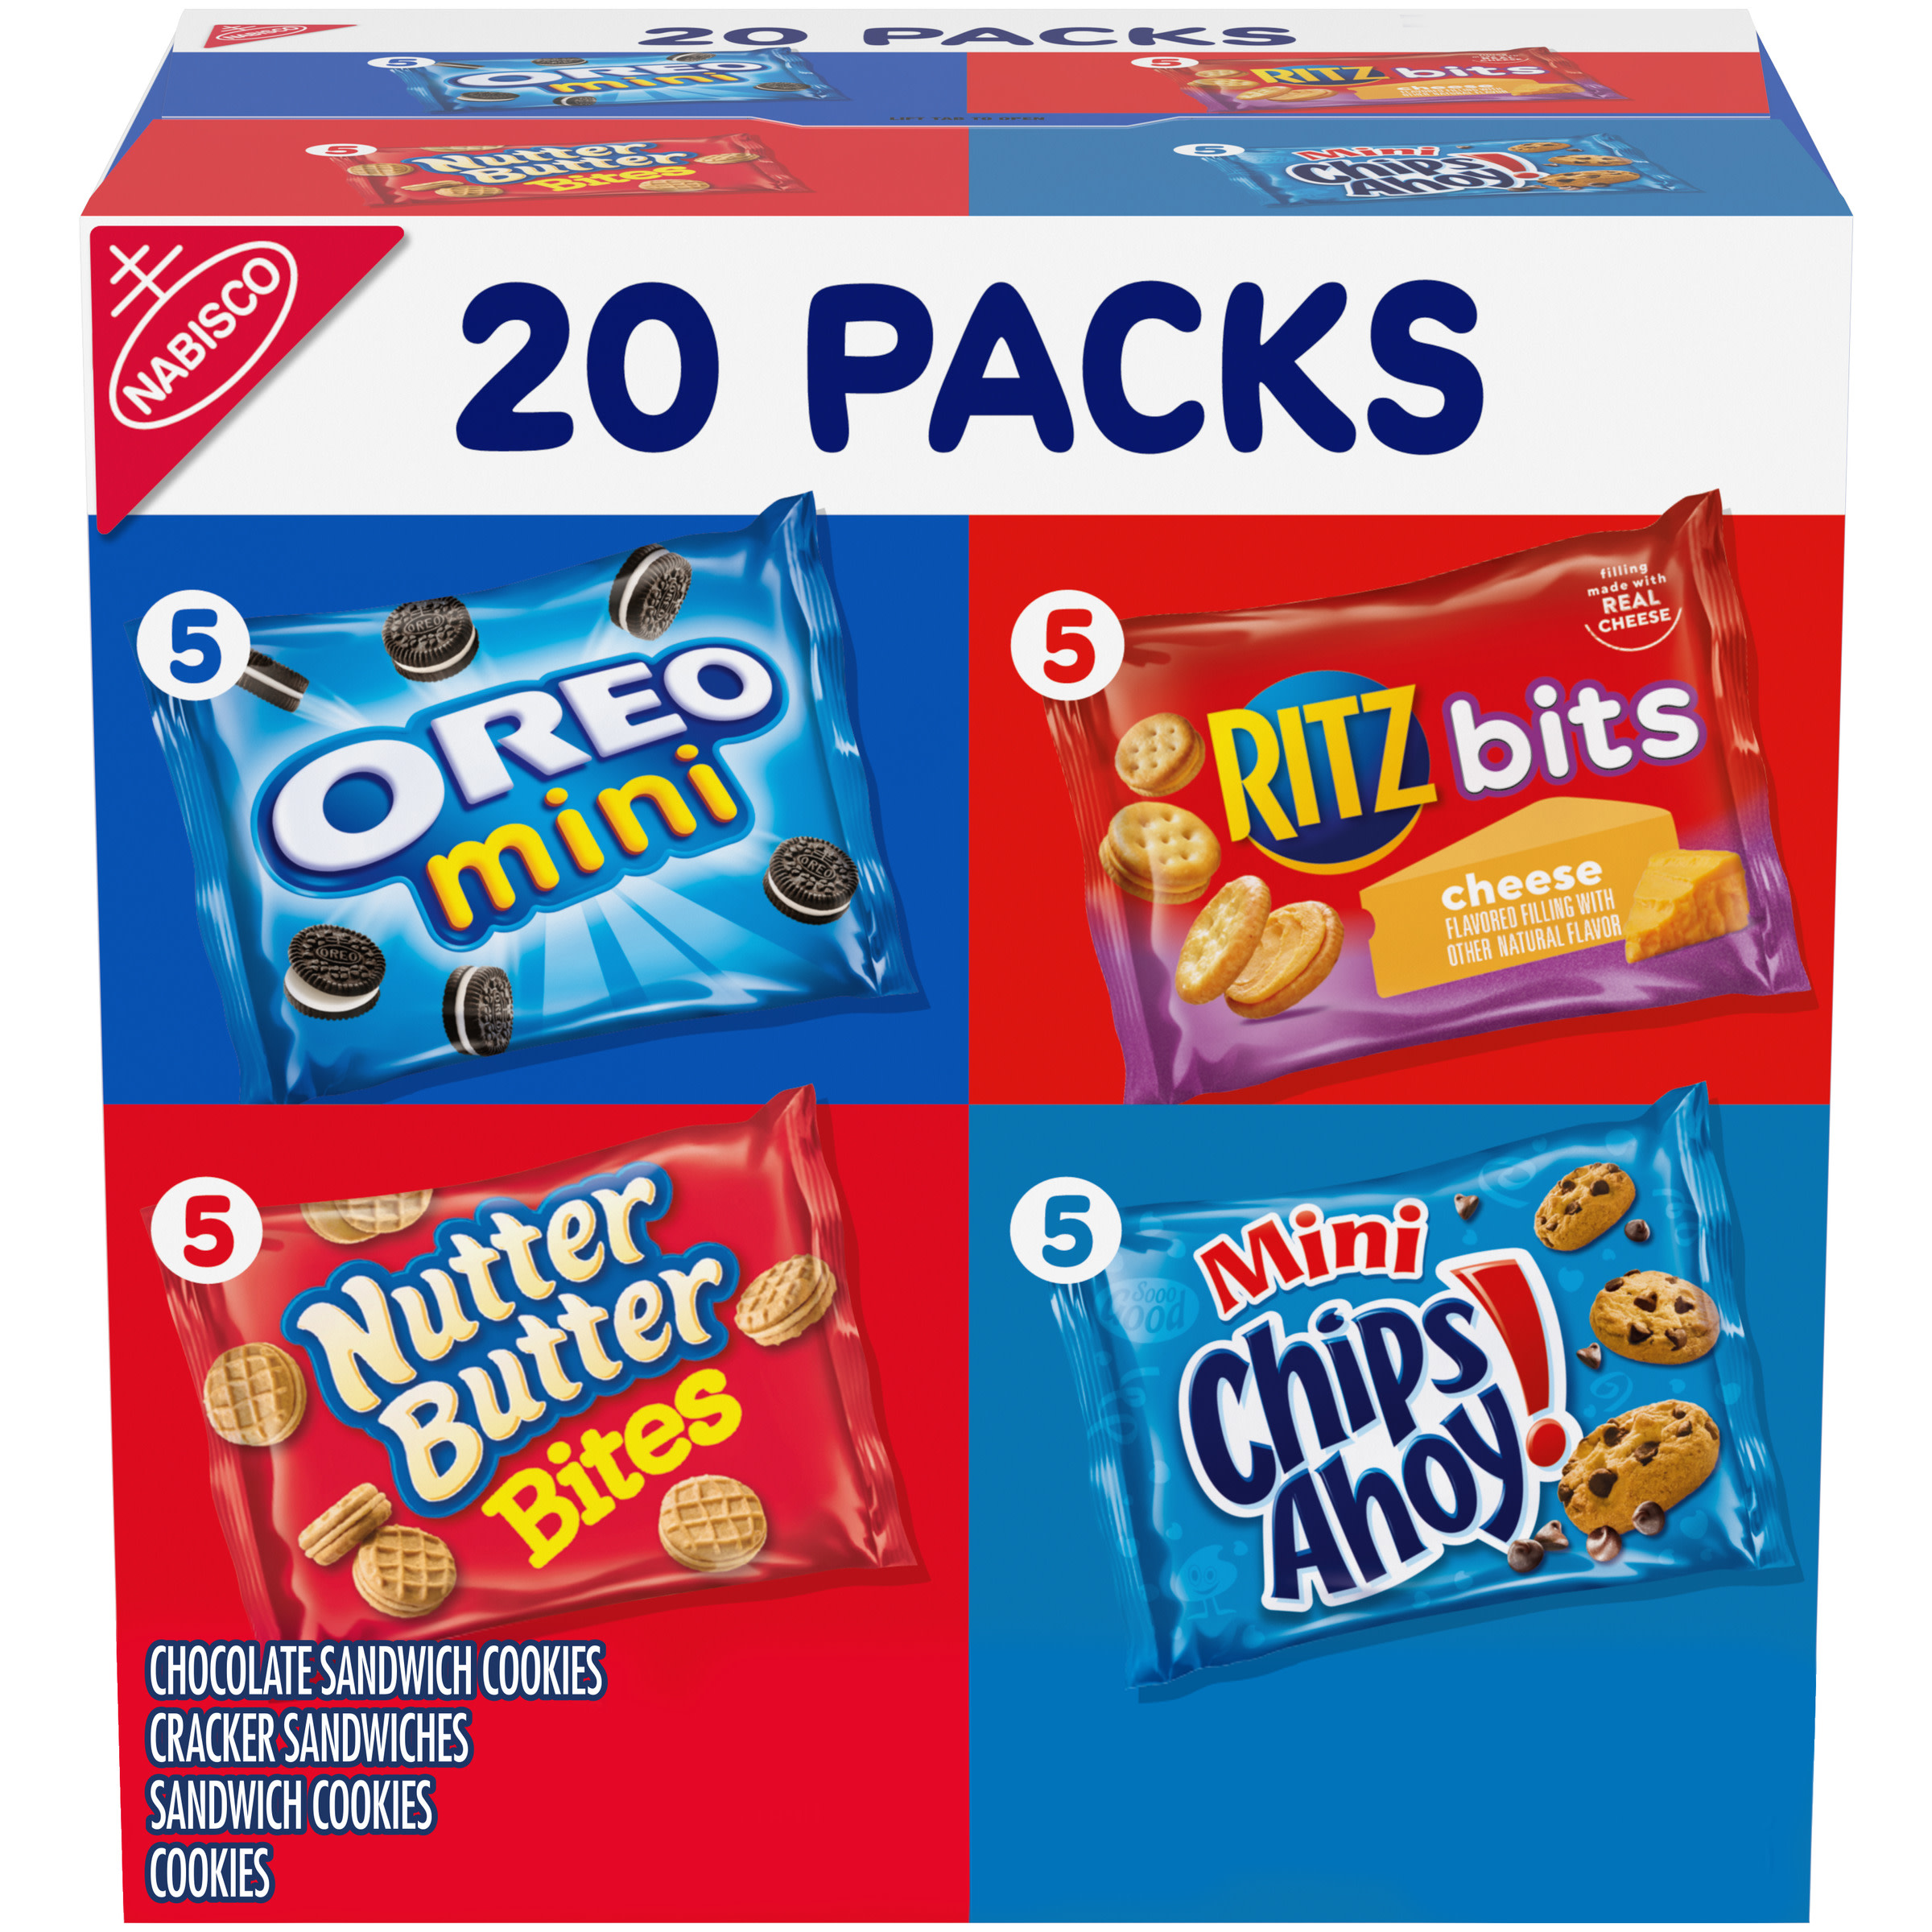 Nabisco Classic Mix Variety Pack, OREO Mini, CHIPS AHOY! Mini, Nutter Butter Bites, RITZ Bits Cheese, Easter Snacks, 20 Snack Packs - image 1 of 12